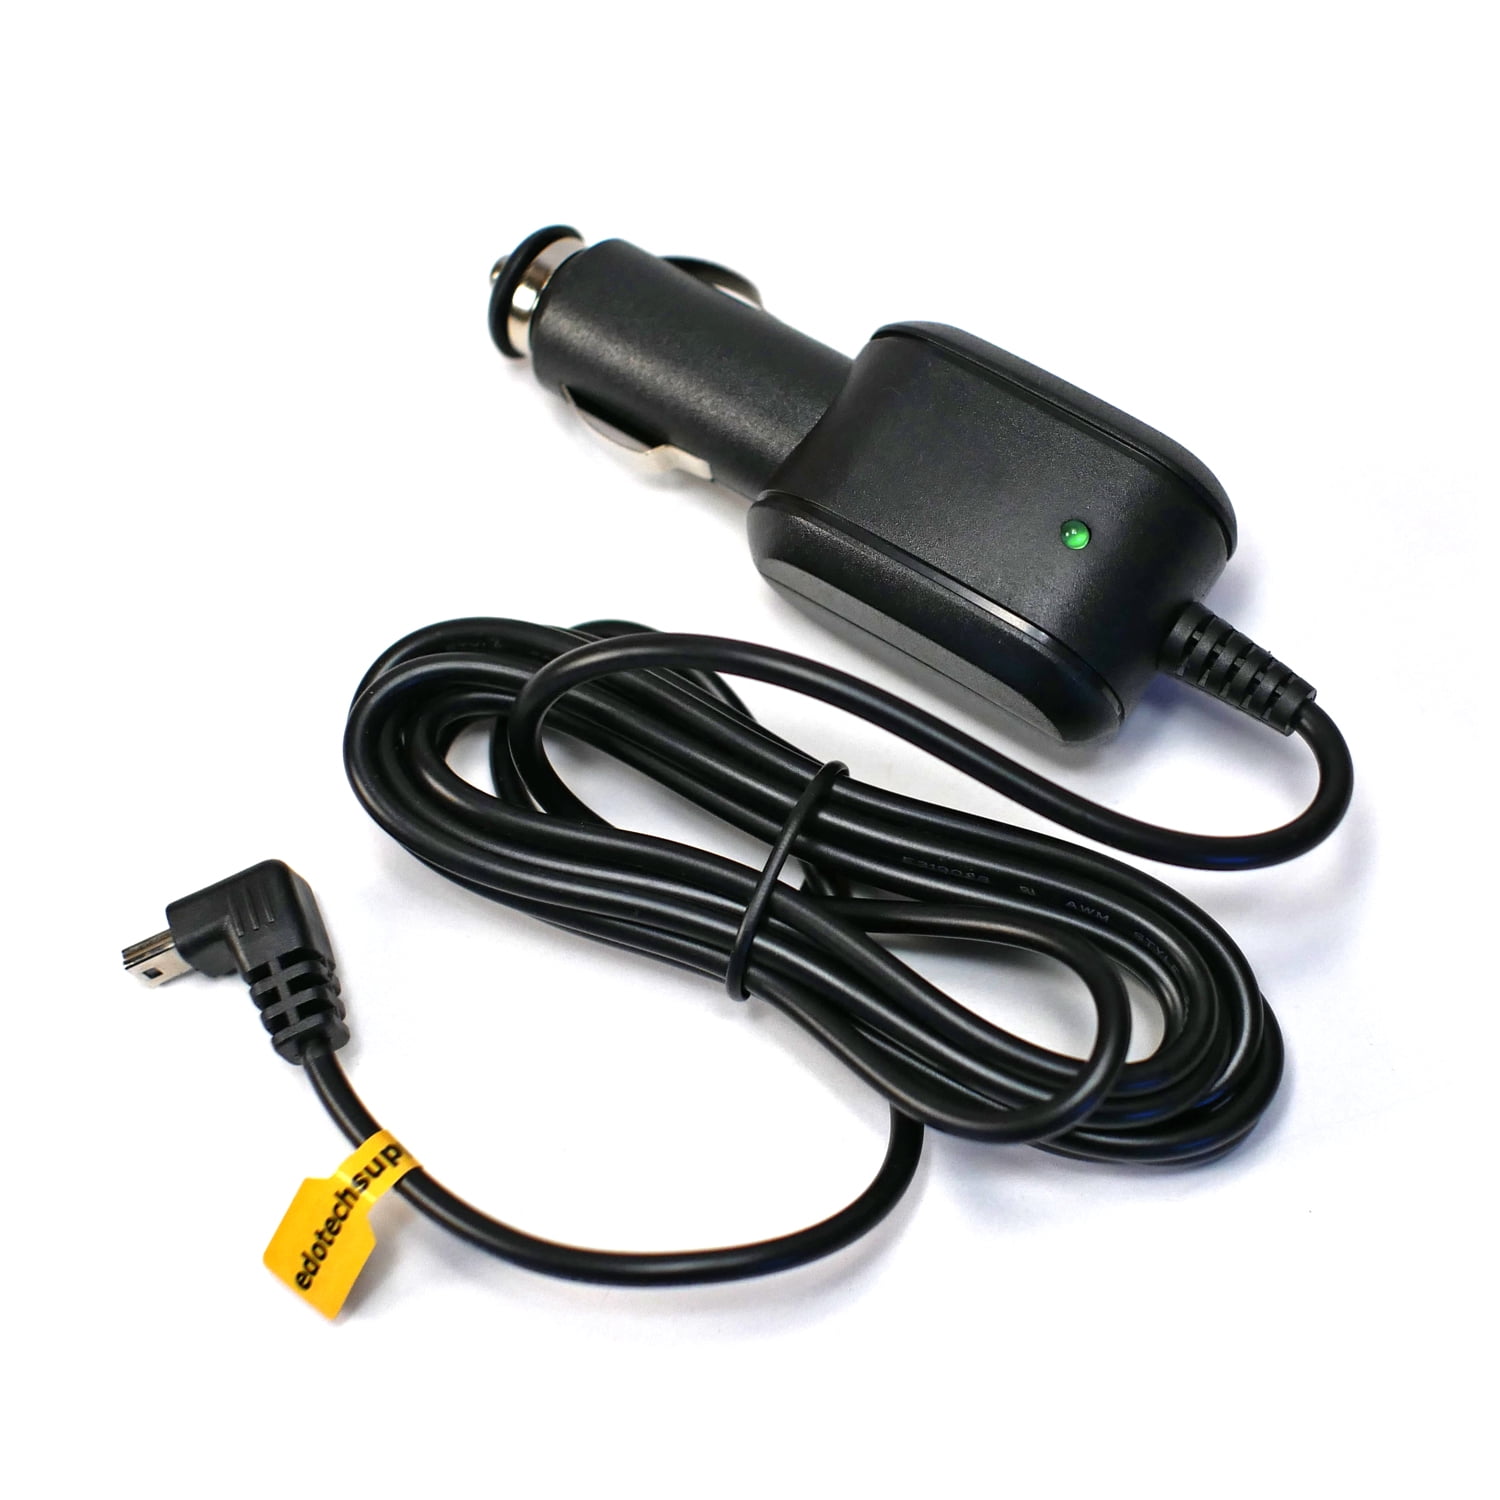 Car Vehicle Power Charger Adapter Cord For Garmin NUVI 3590LM 3590